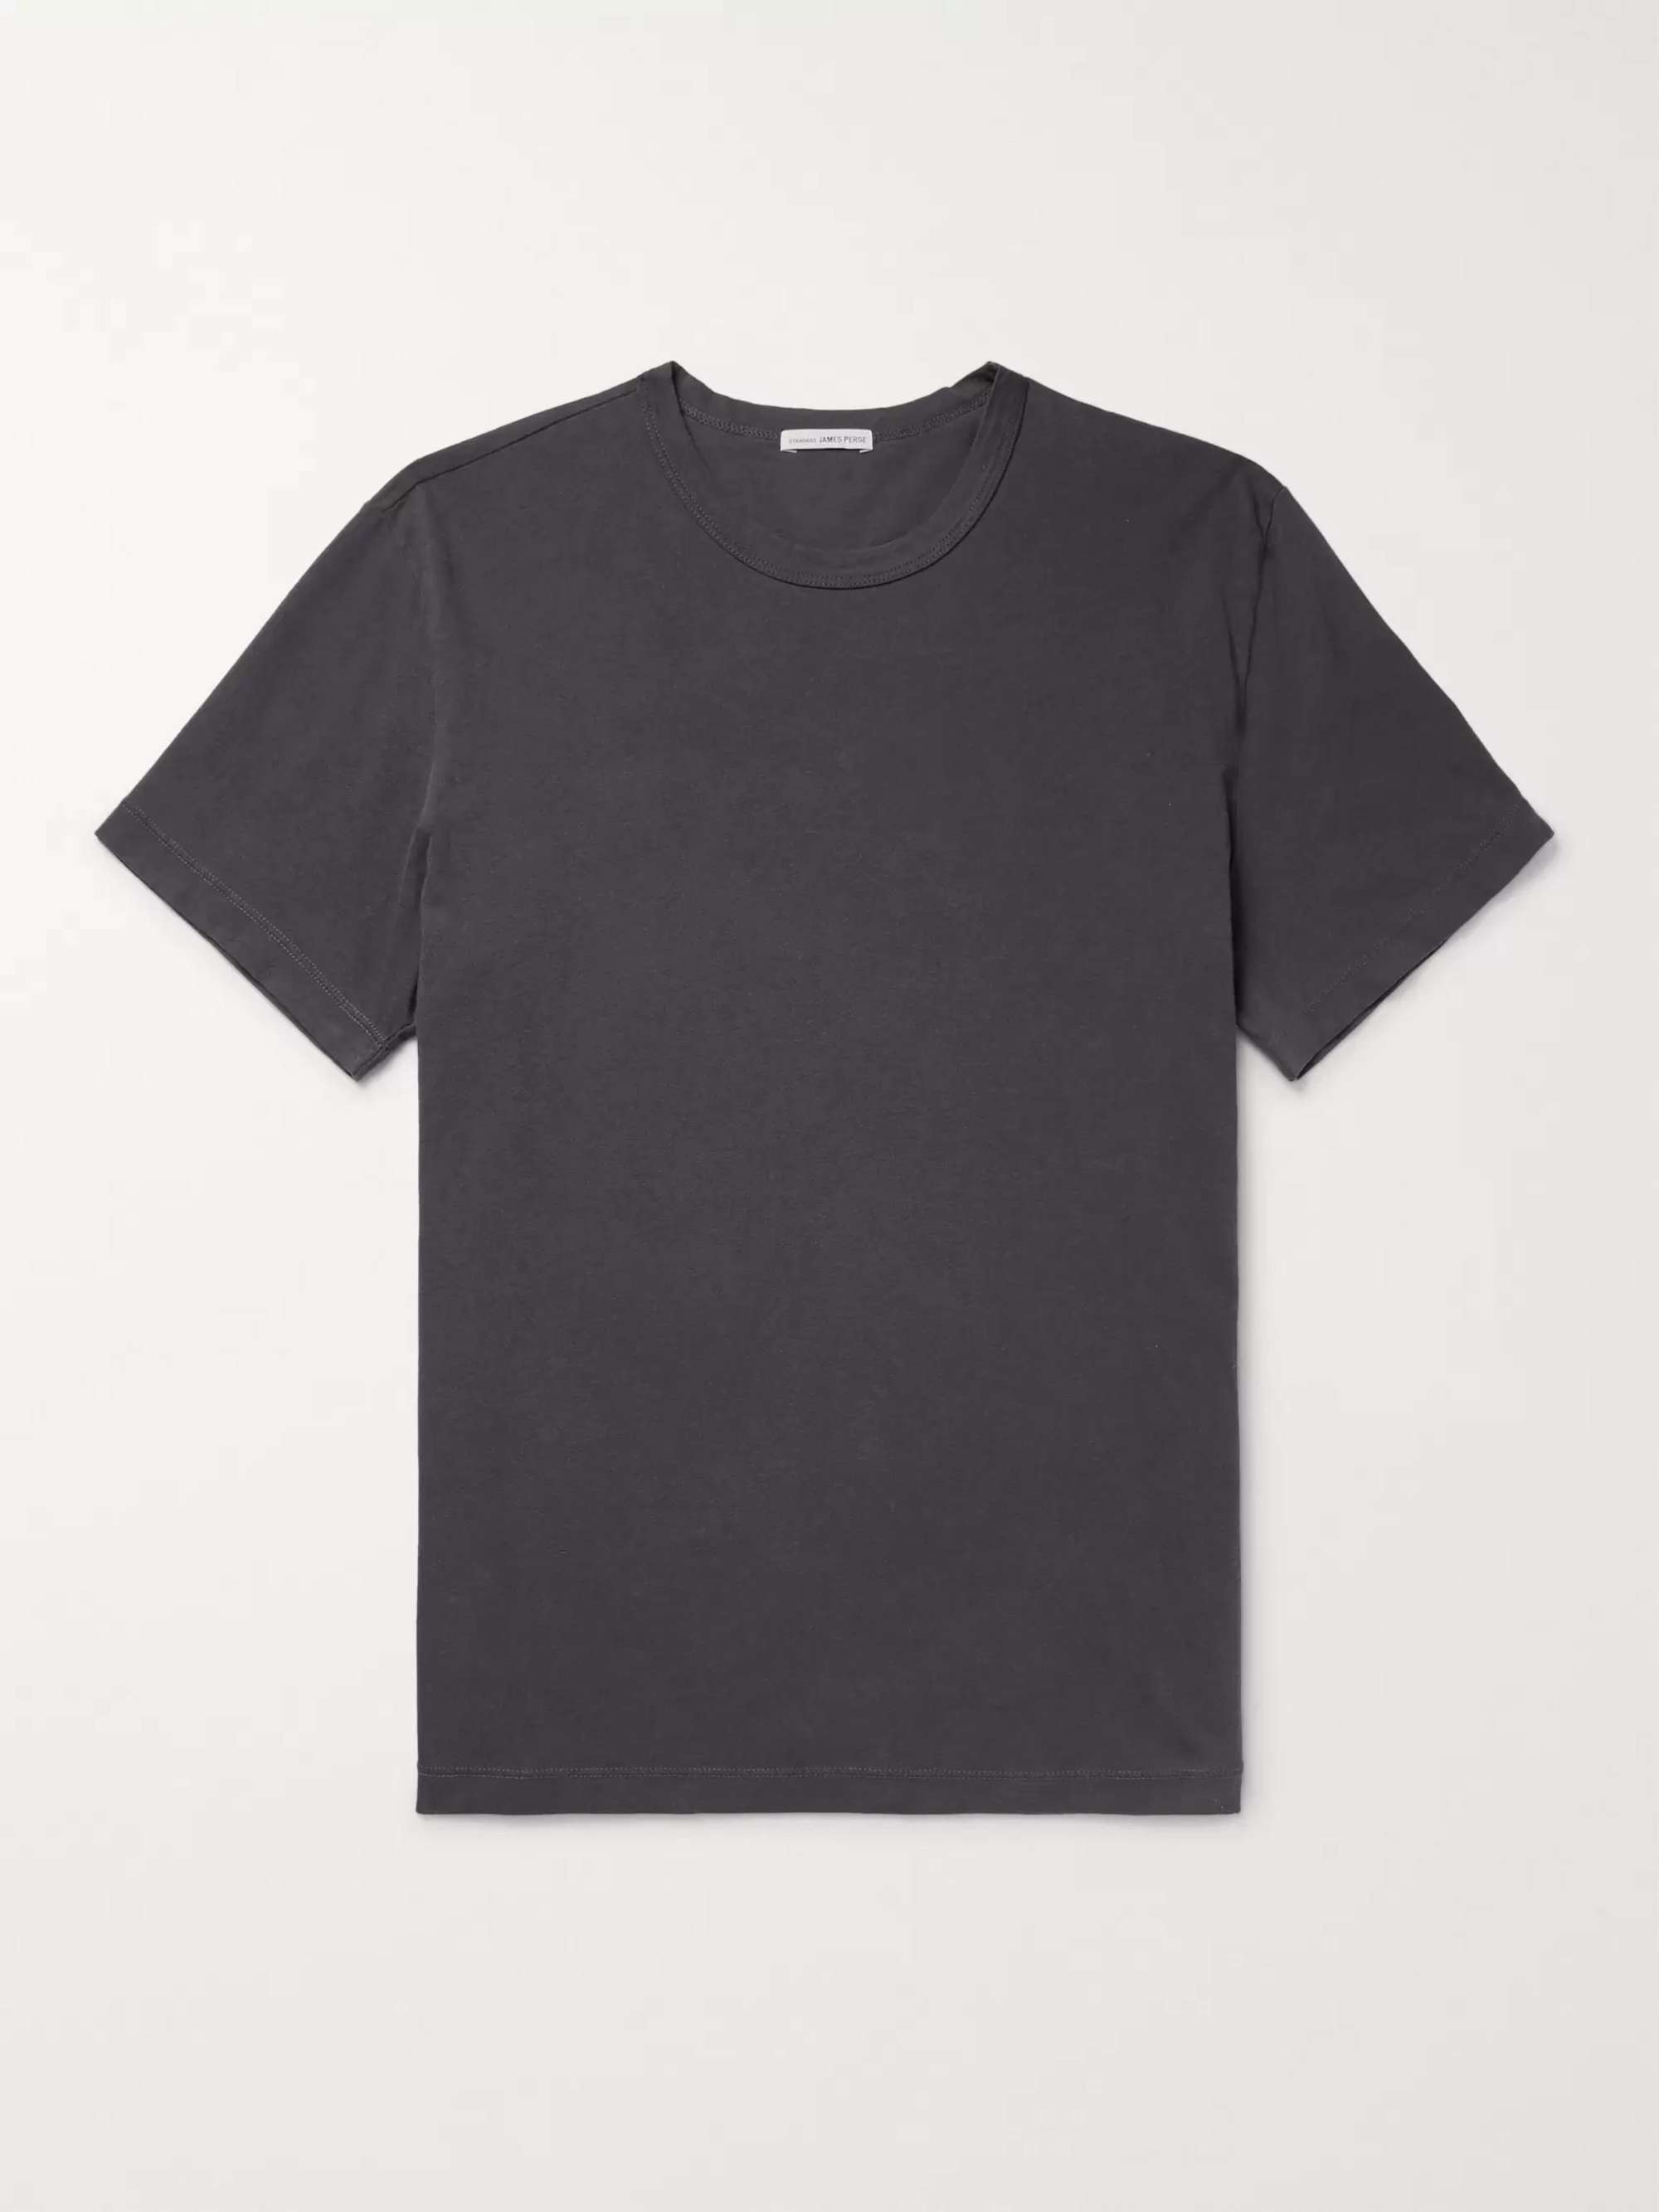 JAMES PERSE Combed Cotton-Jersey T-Shirt | MR PORTER